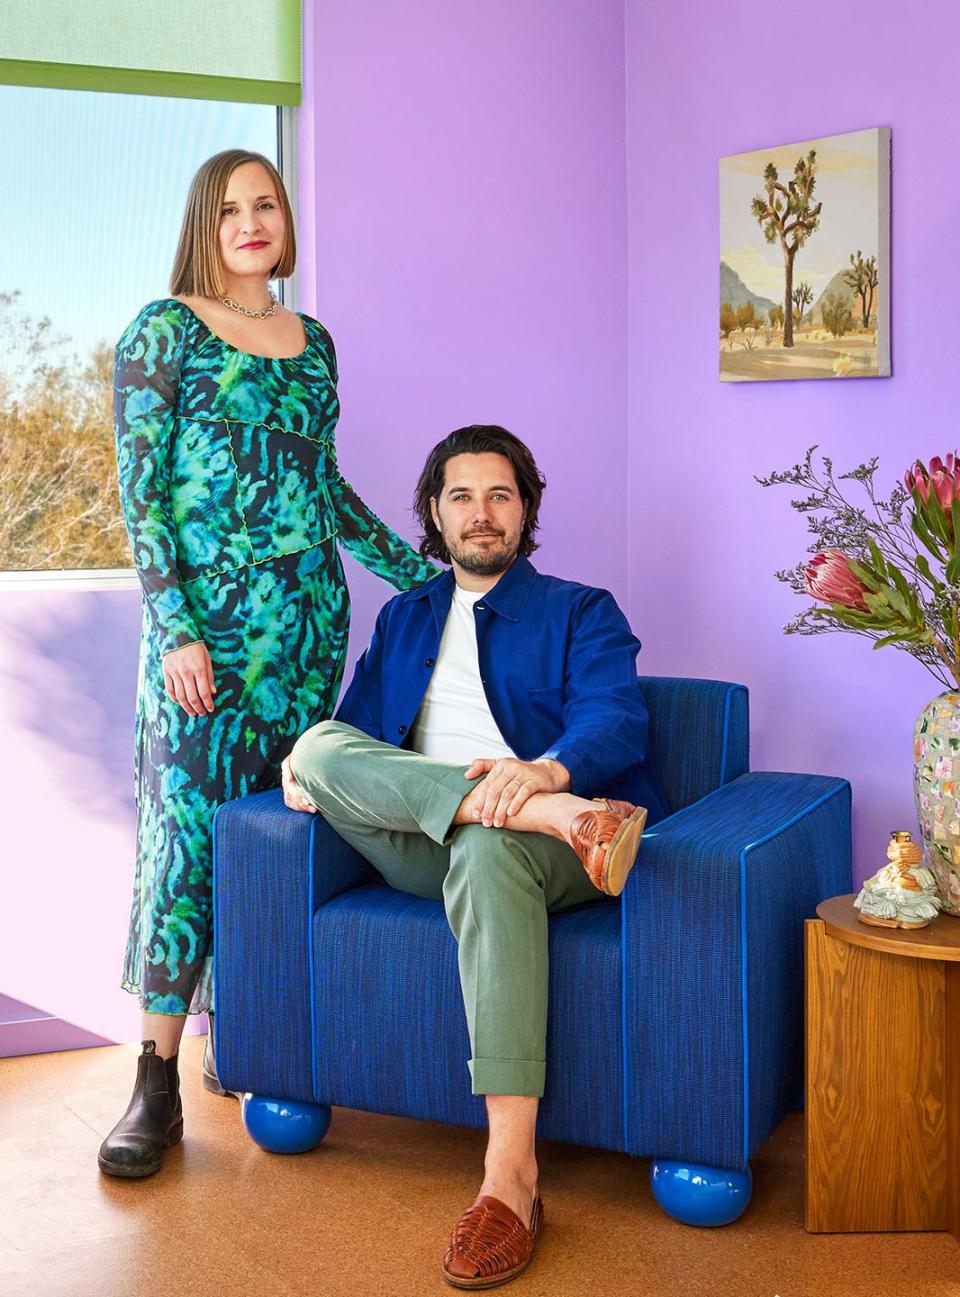 designer in a green patterned dress standing next to husband seated in a dark denim like blue armchair against a purple wall and wood floors